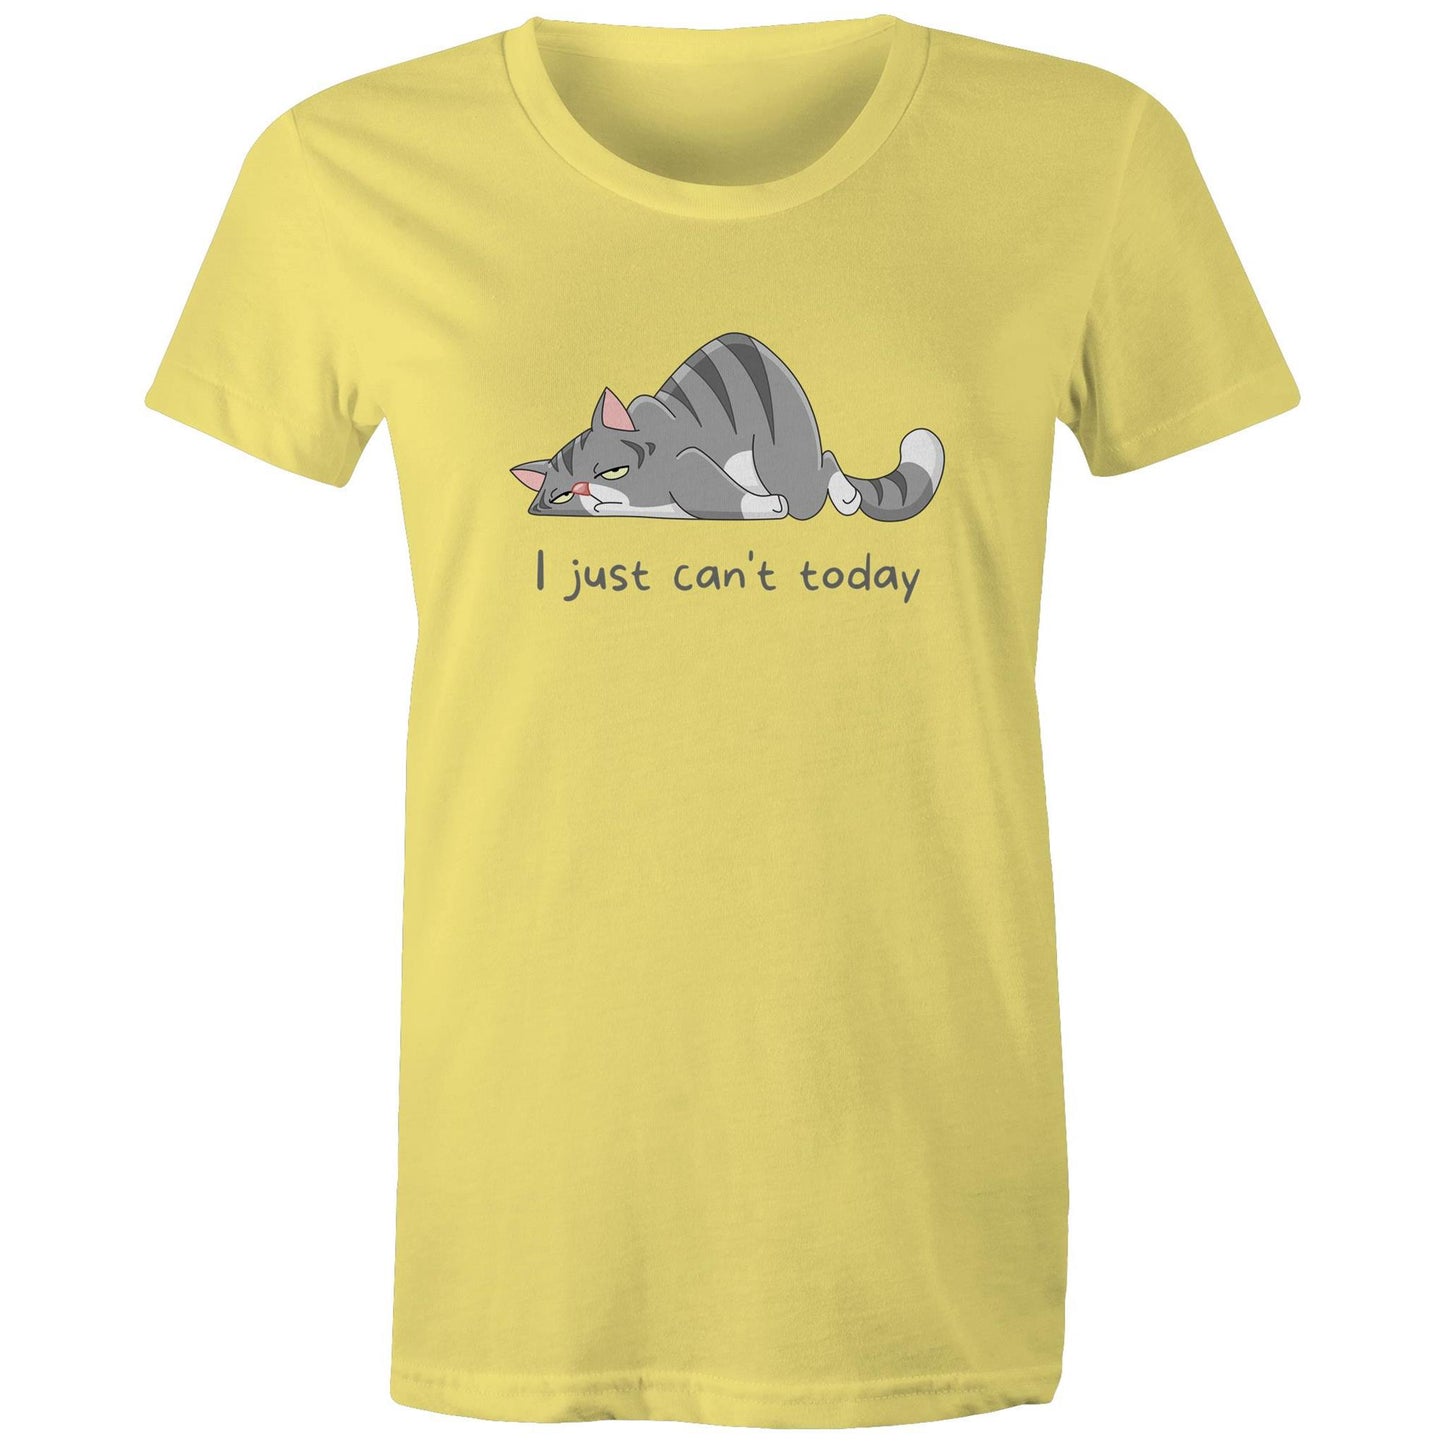 Cat, I Just Can't Today - Womens T-shirt Yellow Womens T-shirt animal